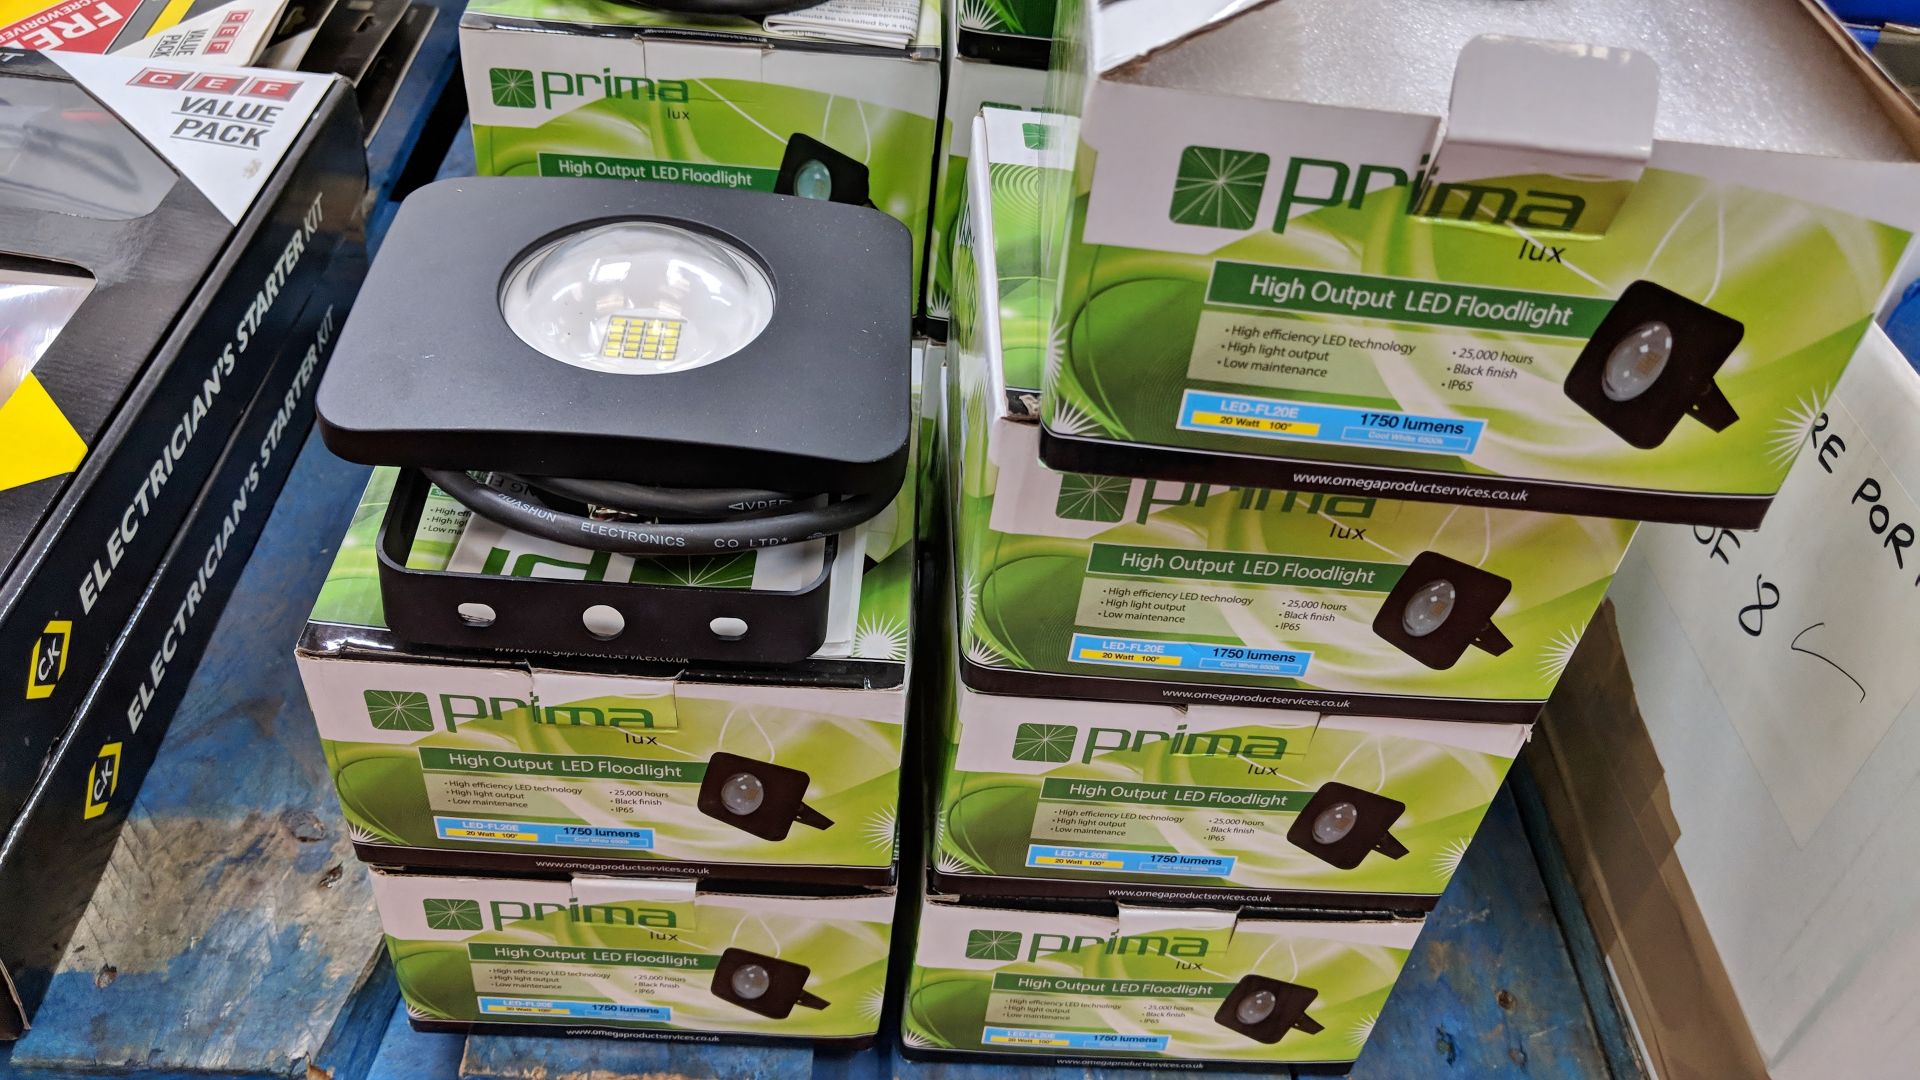 6 off Prima Lux IP65 High Output LED floodlights - 20W, 1,750 lumens The vast majority of products - Image 3 of 3